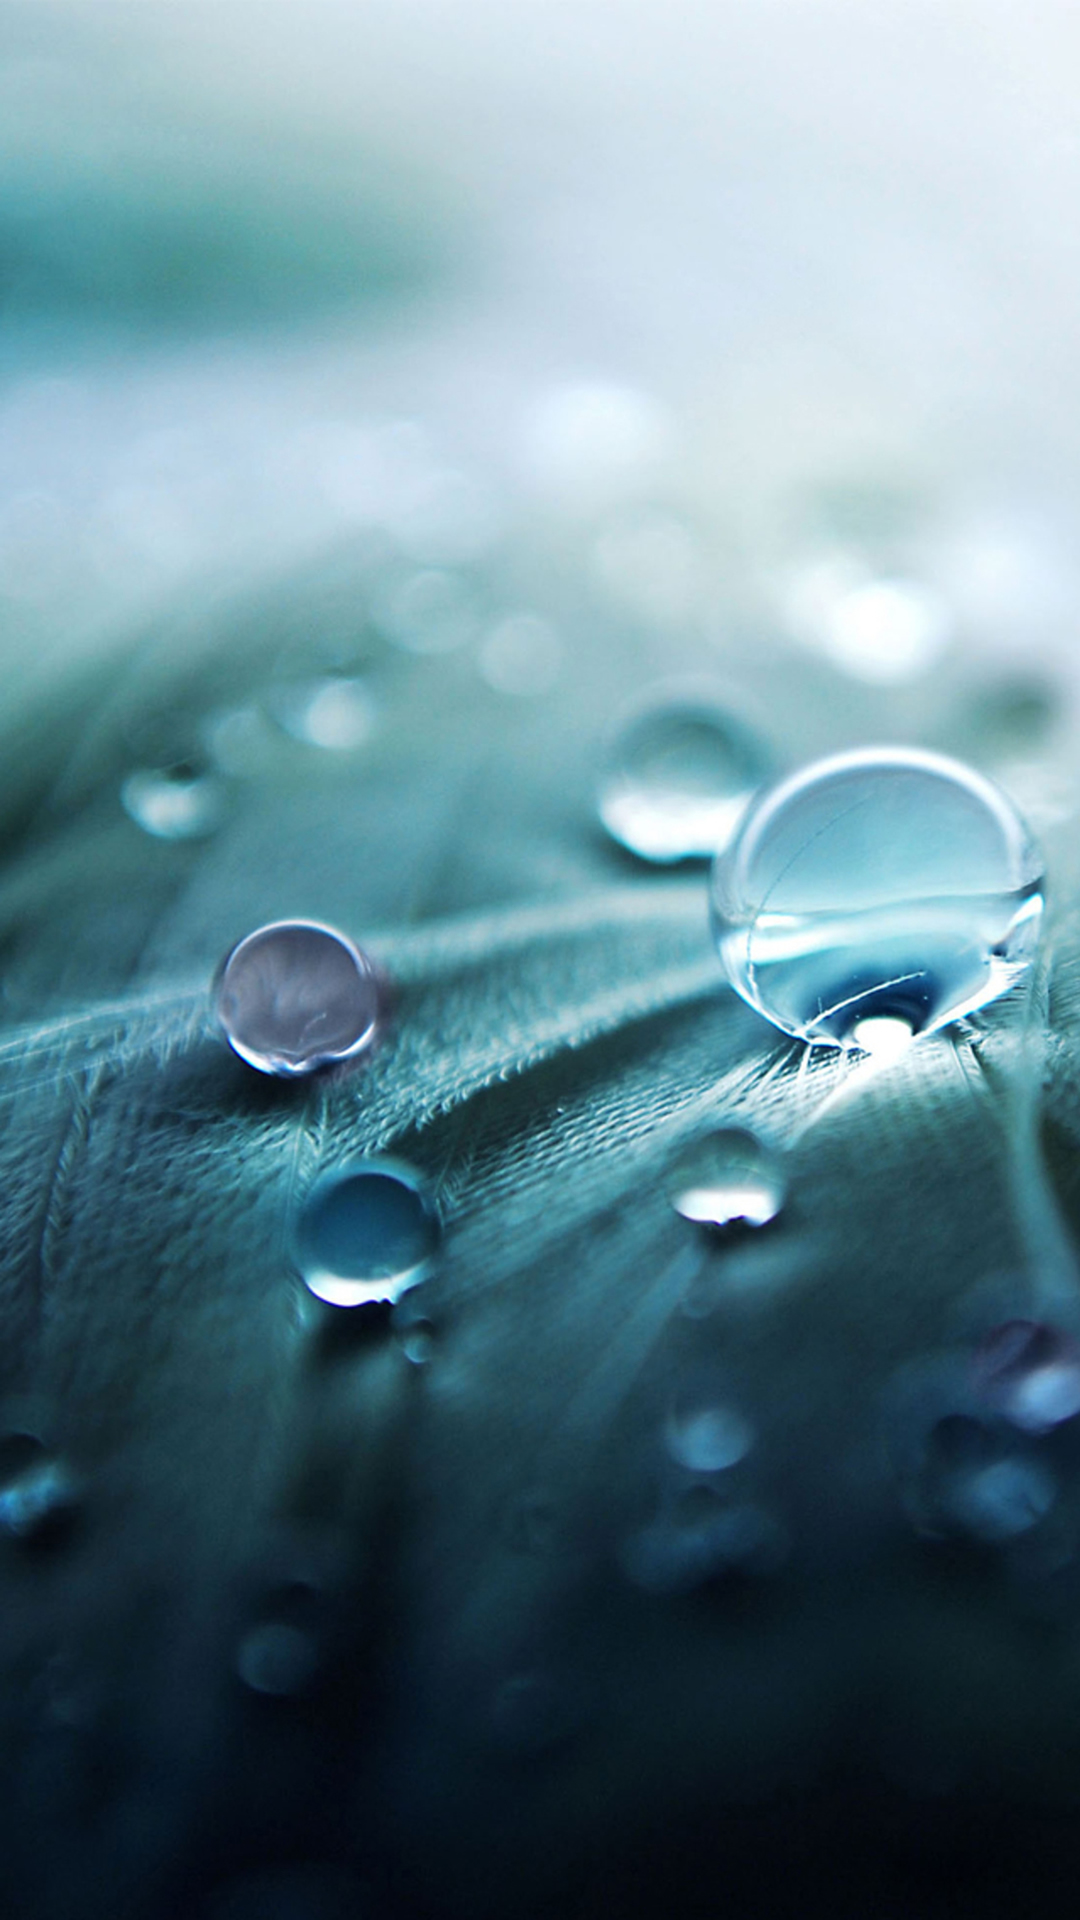 Droplet iPhone 6 Wallpapers iPhone Wallpapers, iPad wallpapers